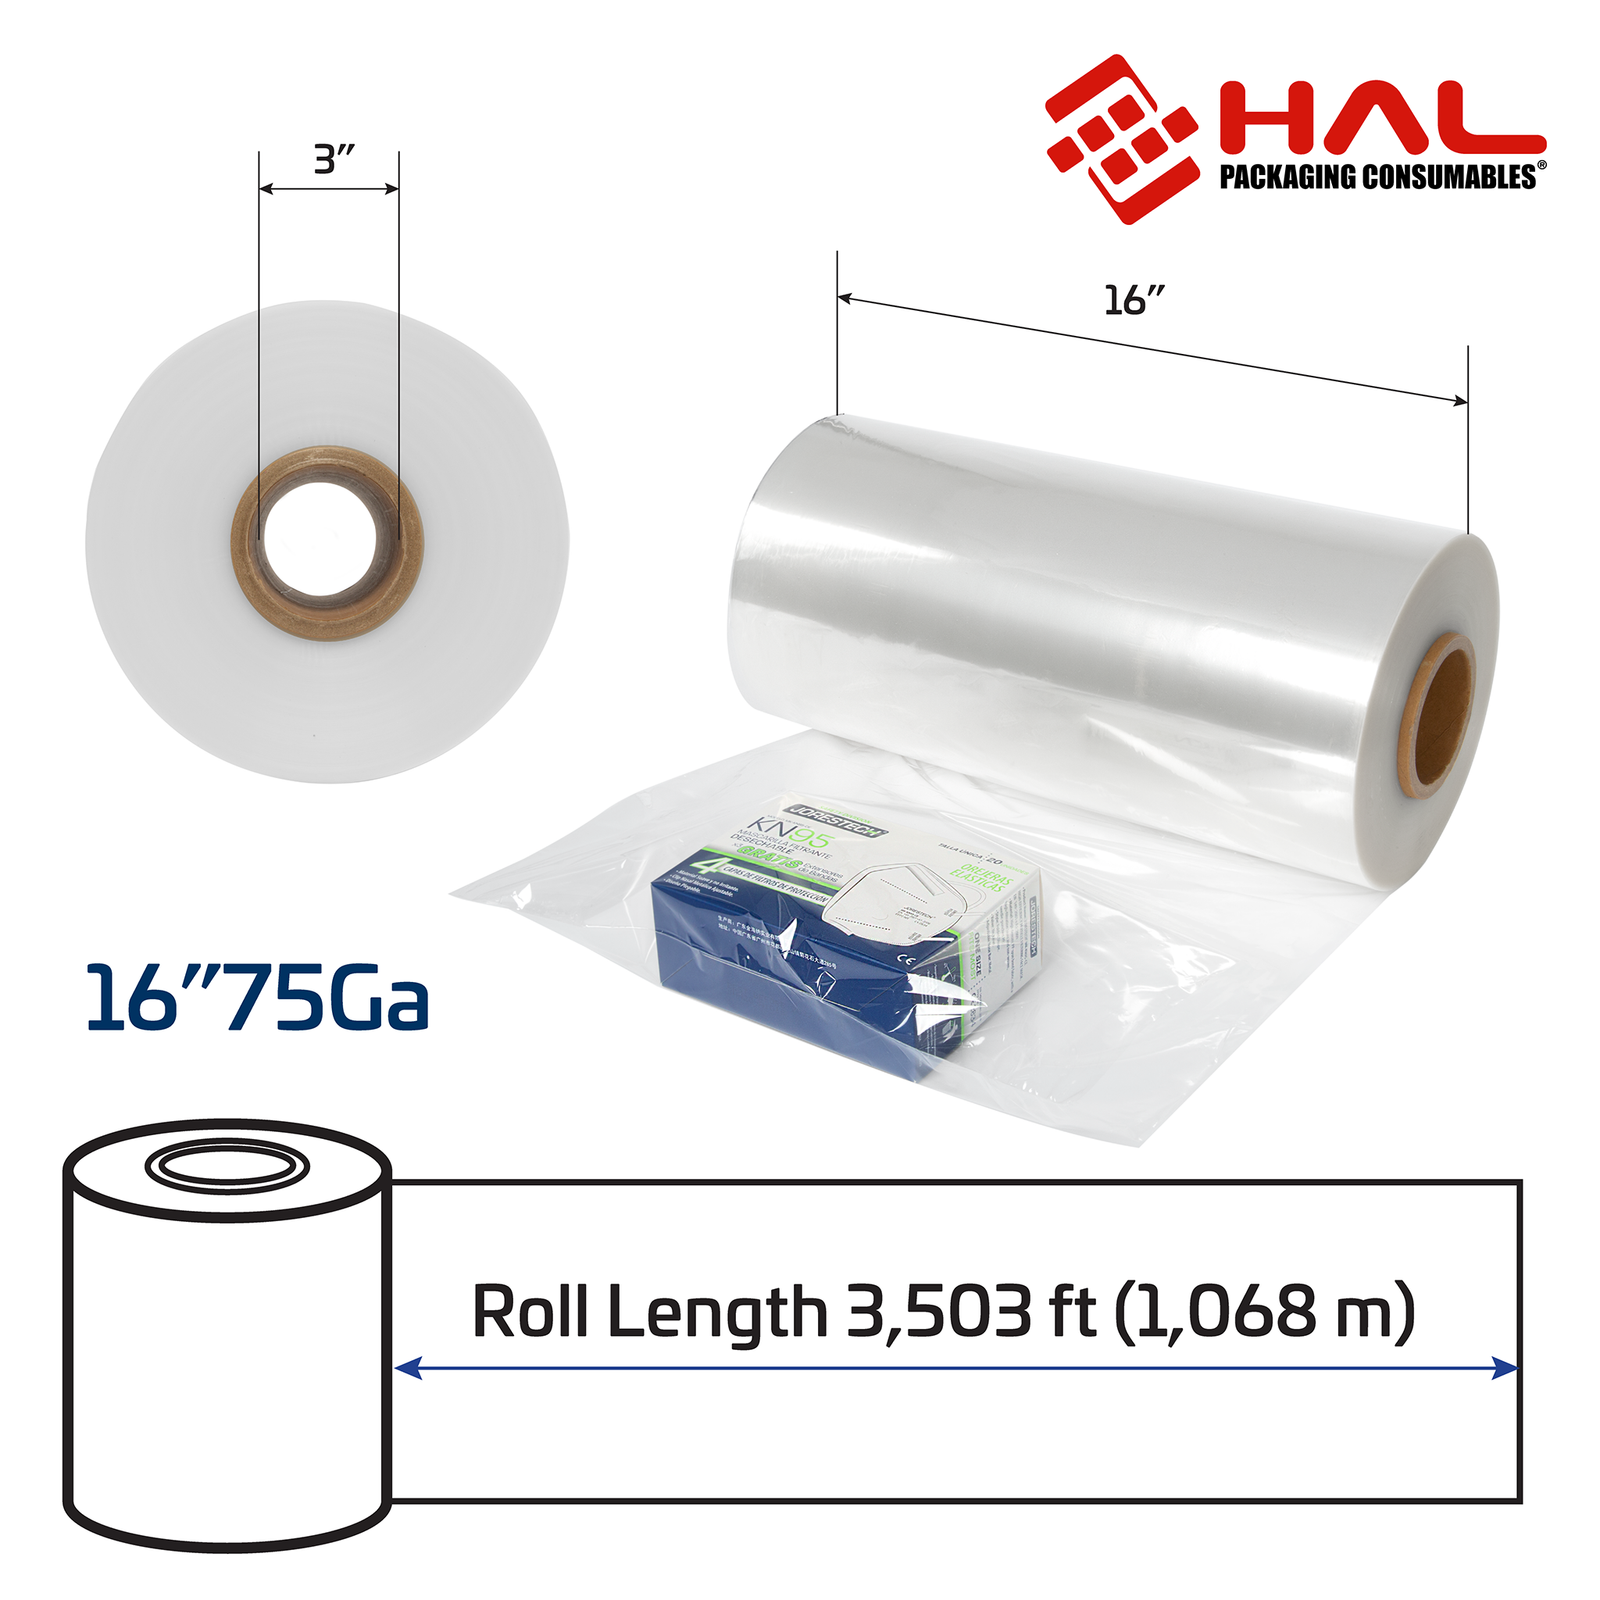 Measurements of the 75 gauge shrink wrapping film tube. 3 inch diameter of the inner core, and 16 inch width with a 3,503 ft. length (1,068 meters).